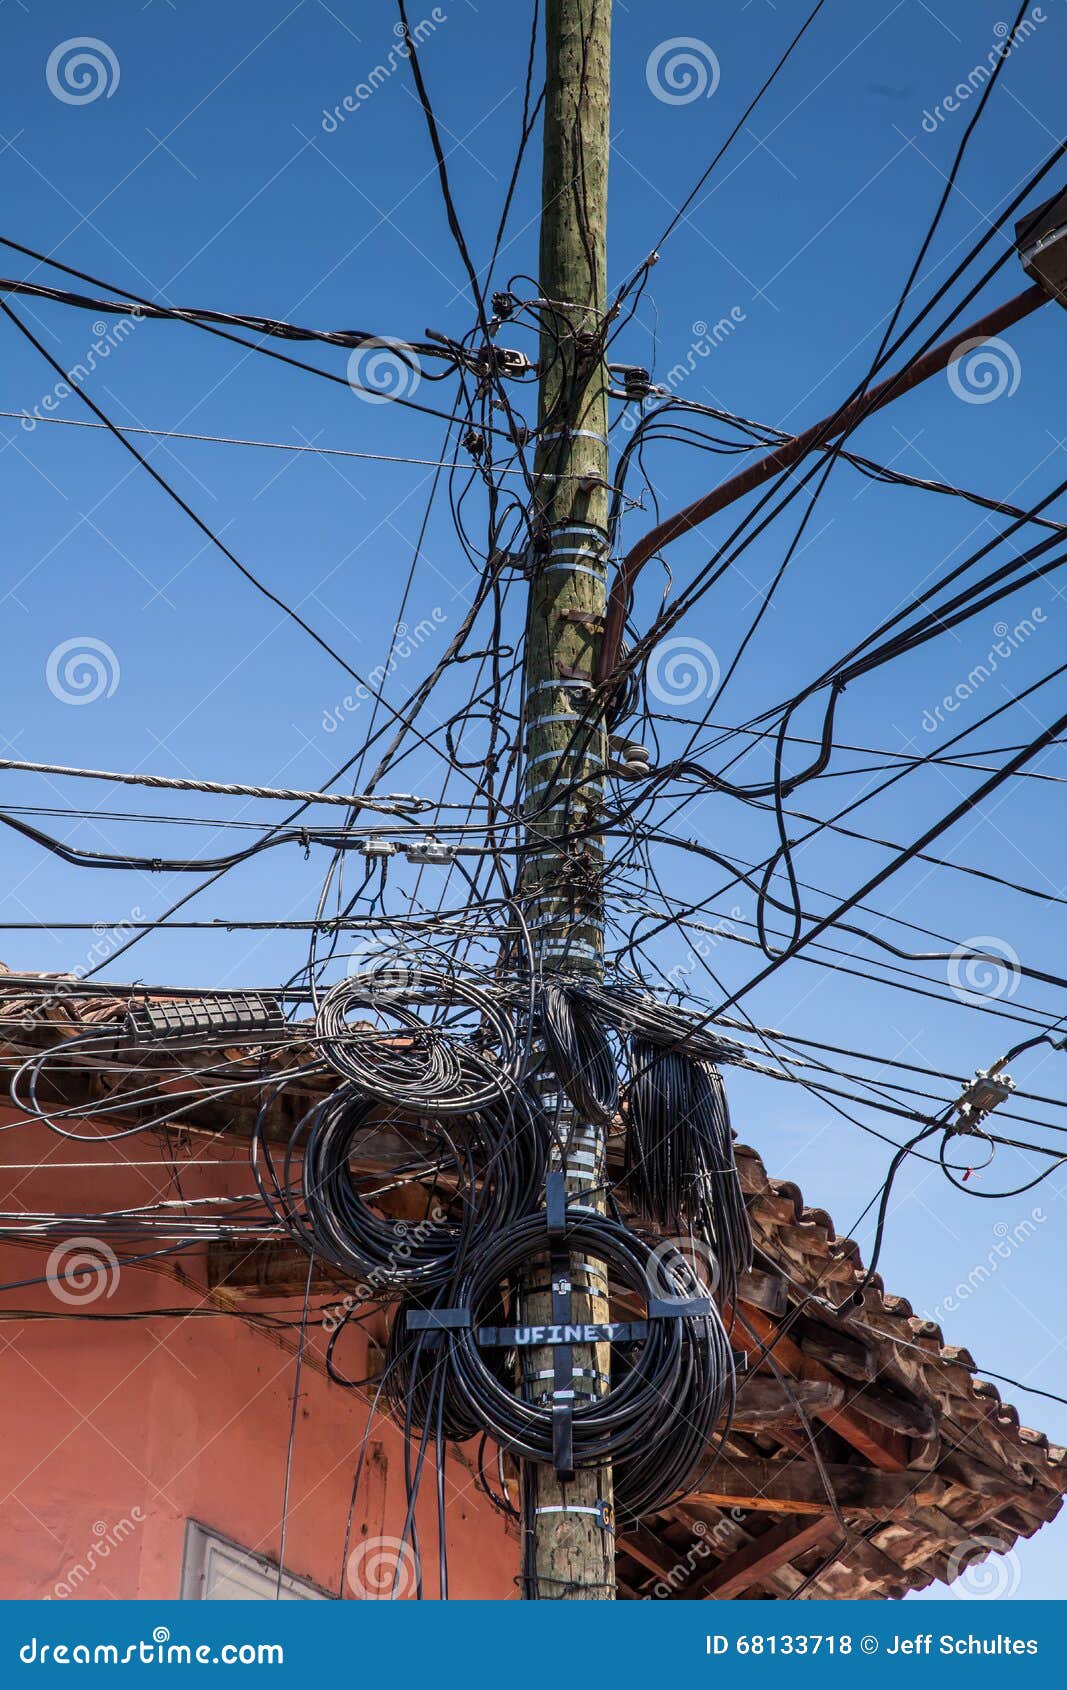 Cable TV &amp; electrical cables on a pole, Granada, Nicaragua, 3 Mar 2016